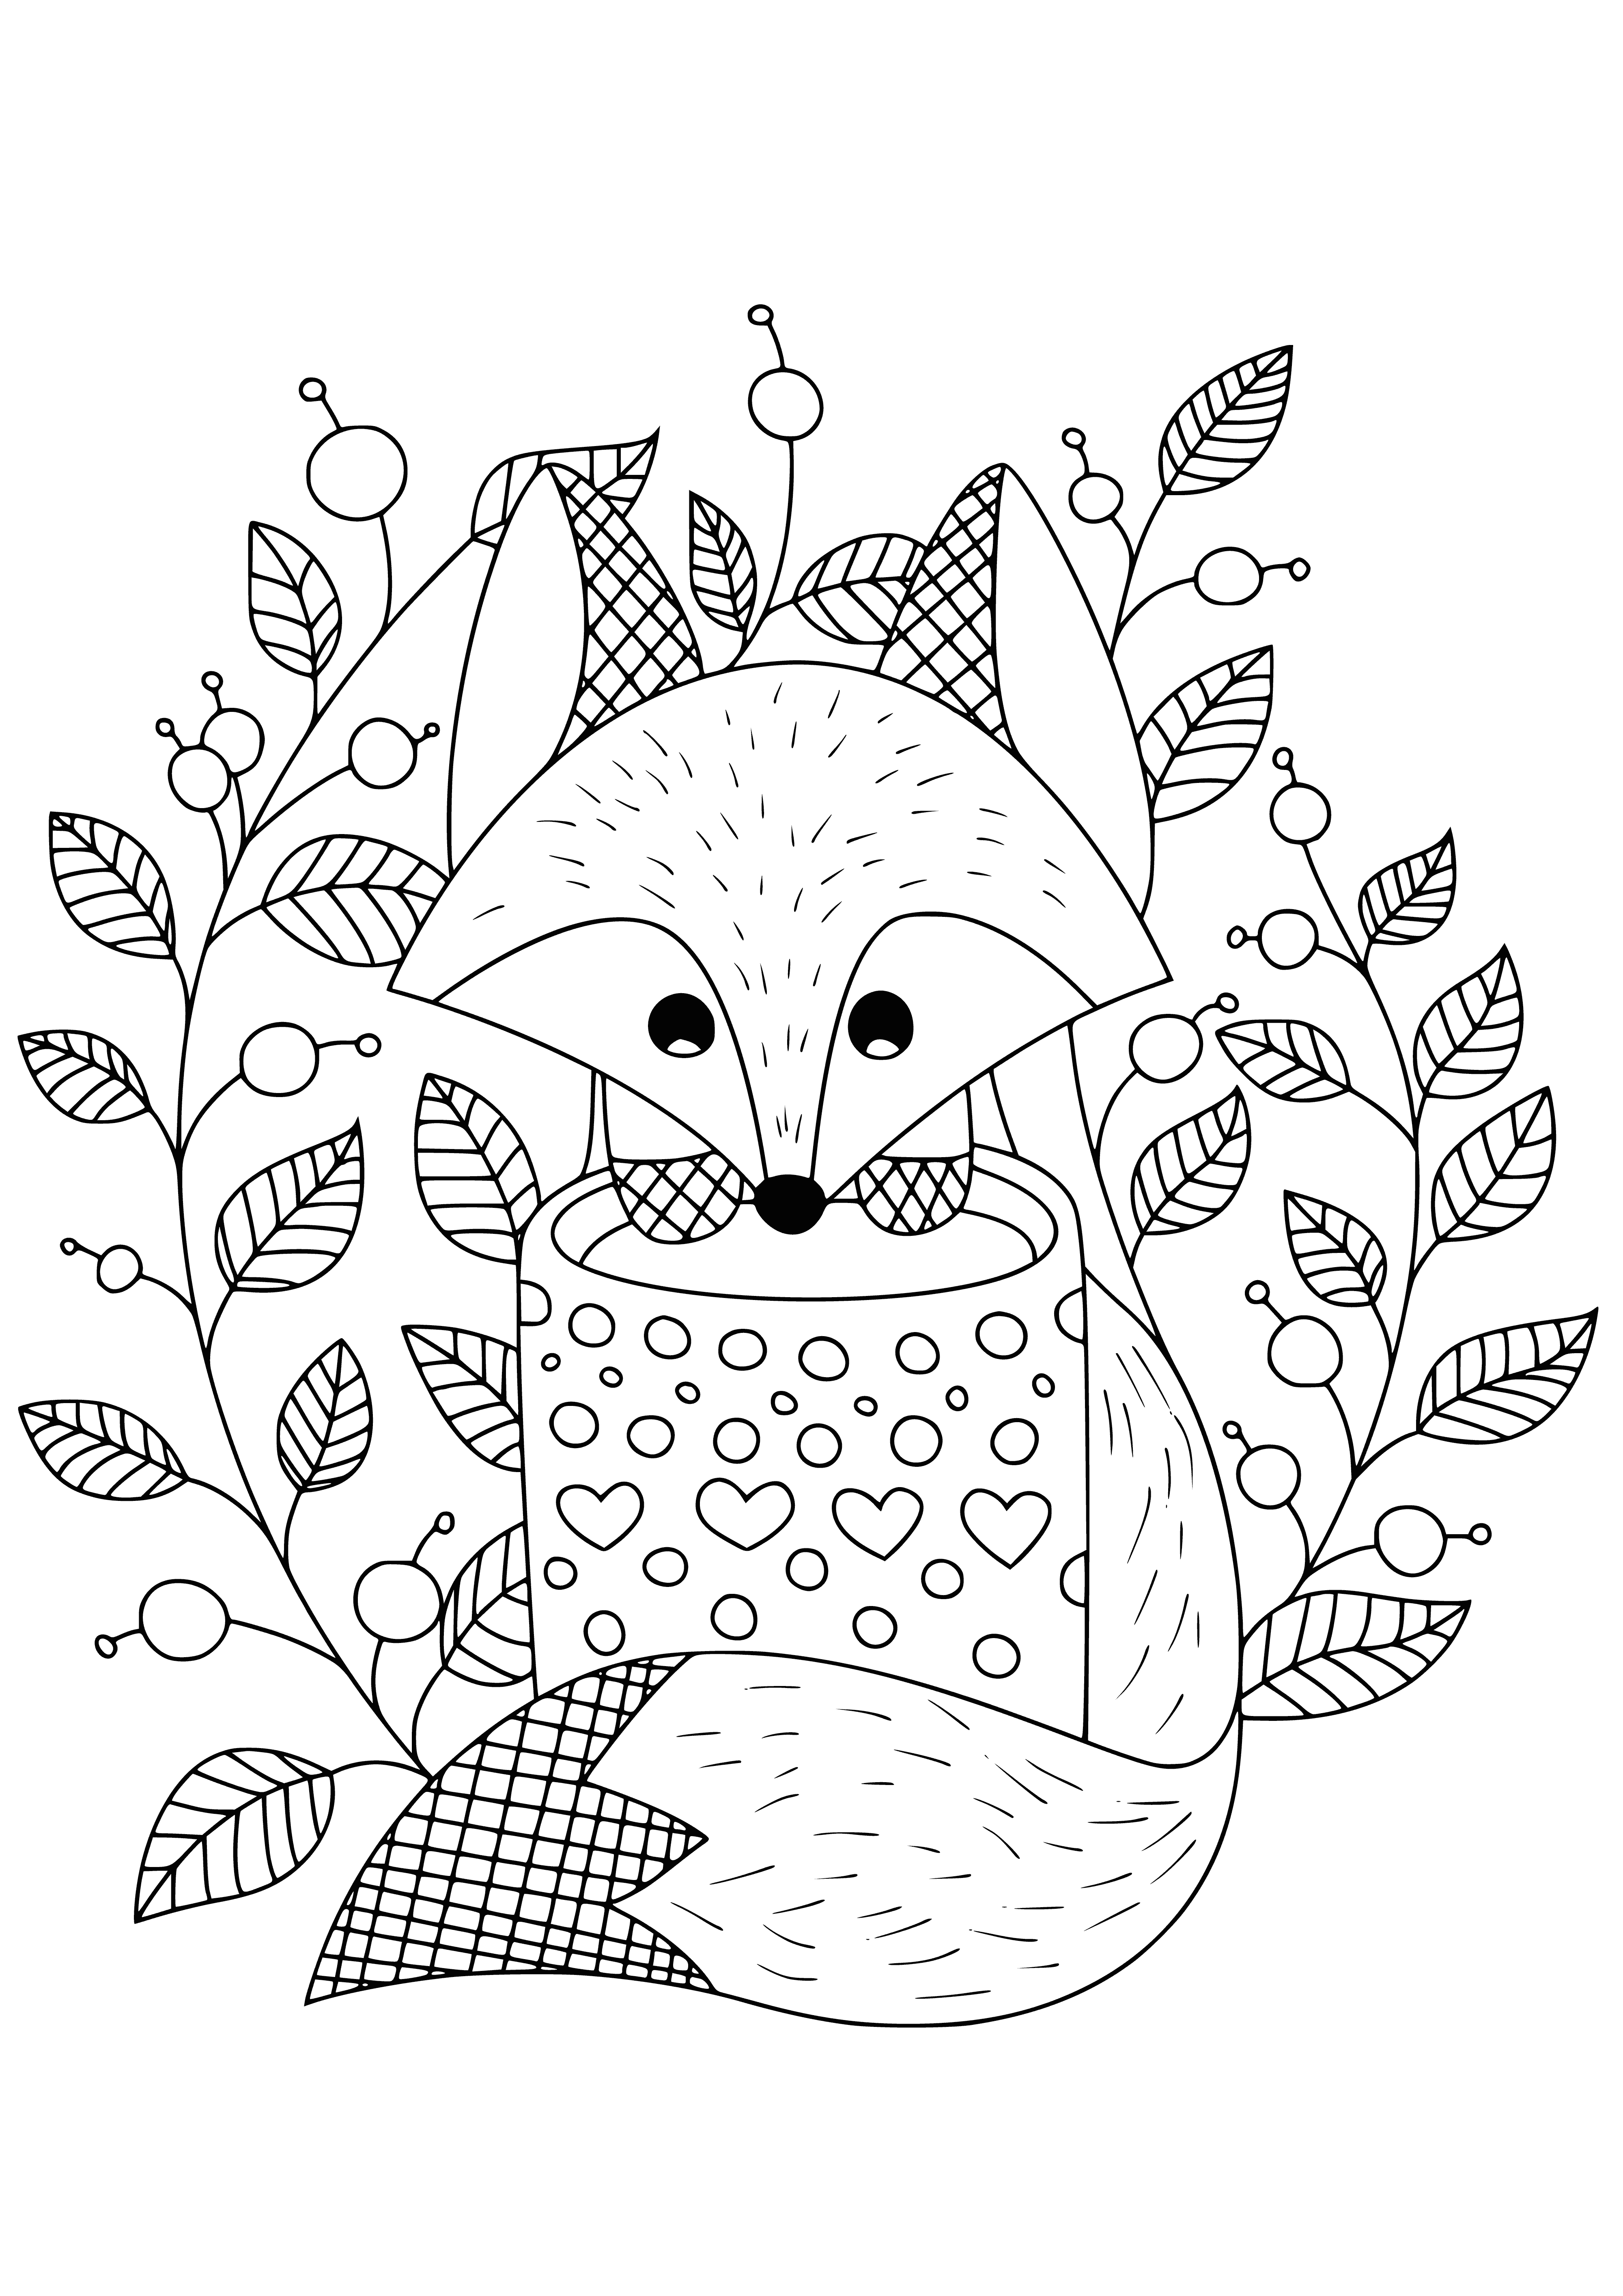 coloring page: A fox lies down with pointy ears and orange & white fur - its belly is white & it has a bushy tail. #coloringpage